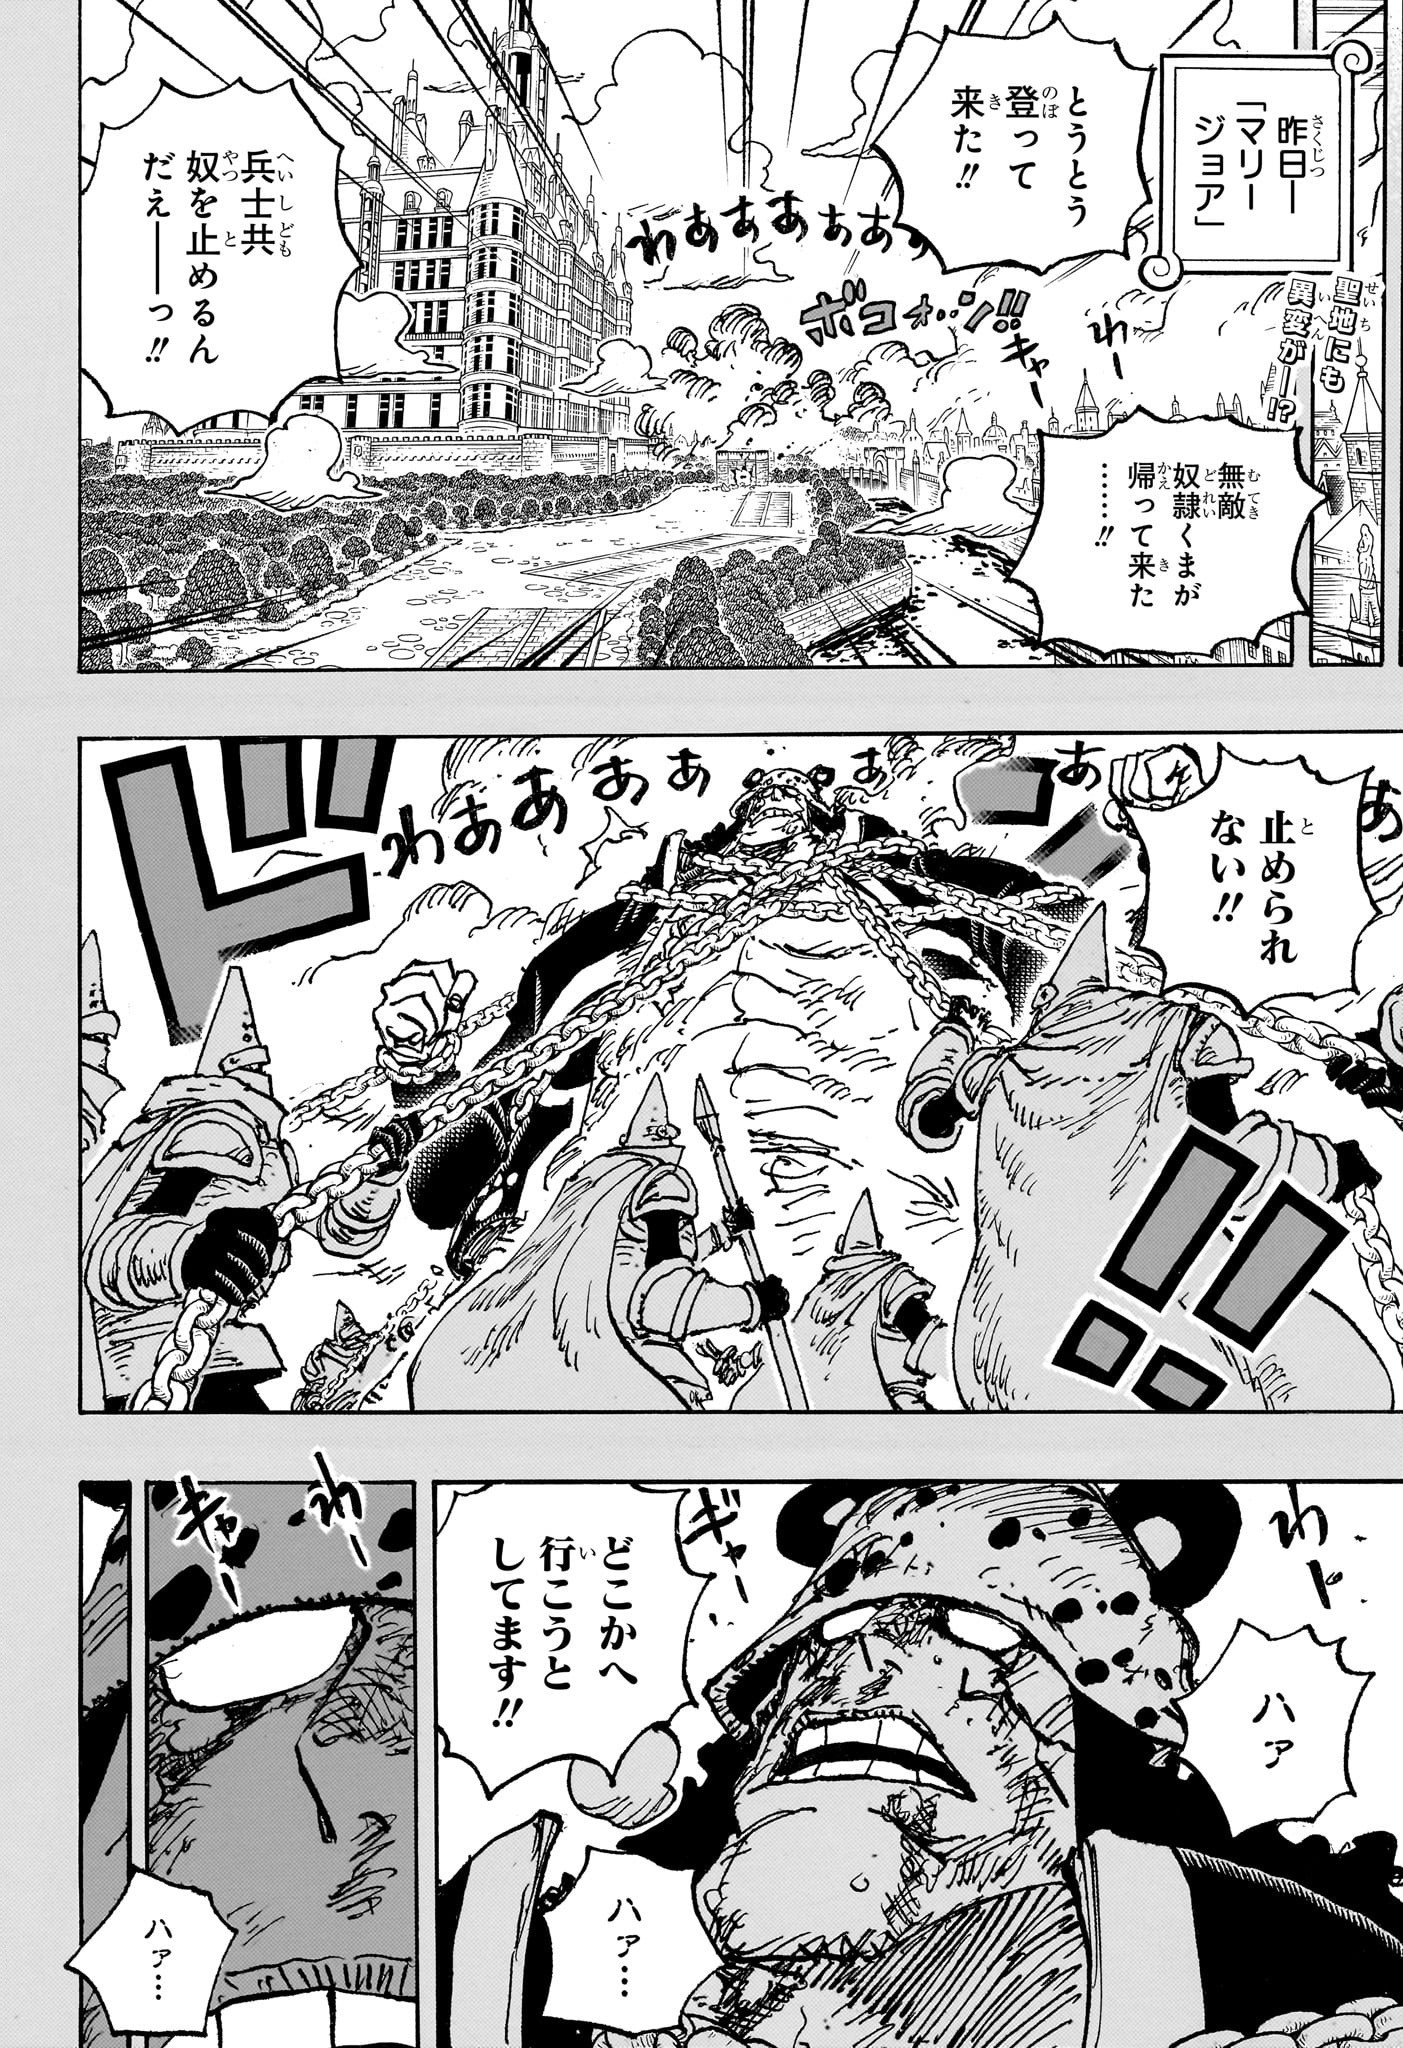 One Piece - Chapter 1092 - Page 2